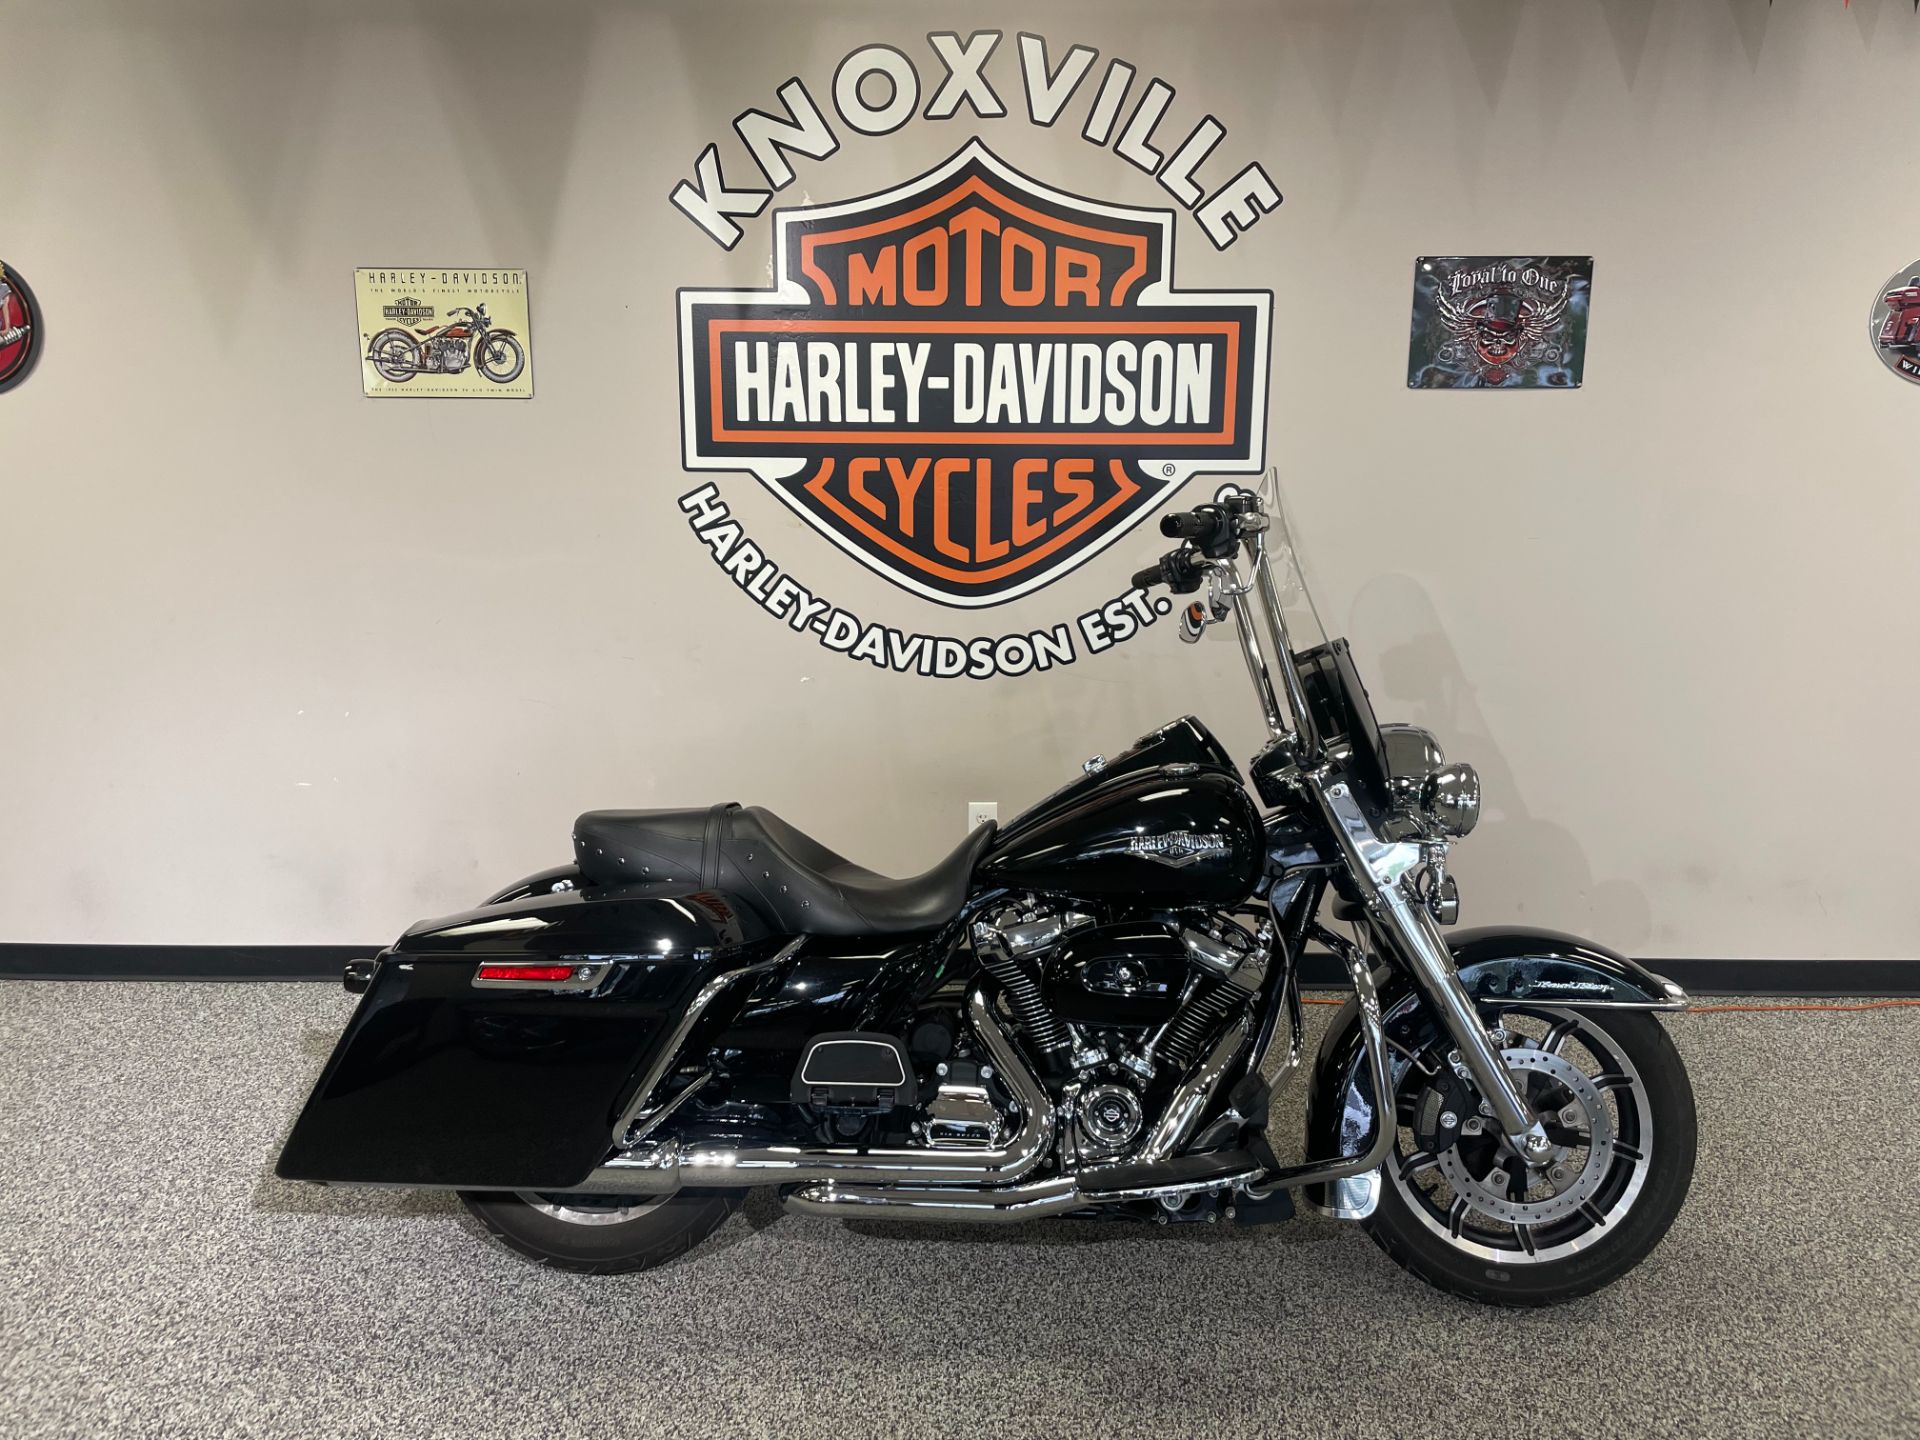 2019 Harley-Davidson ROAD KING in Knoxville, Tennessee - Photo 1